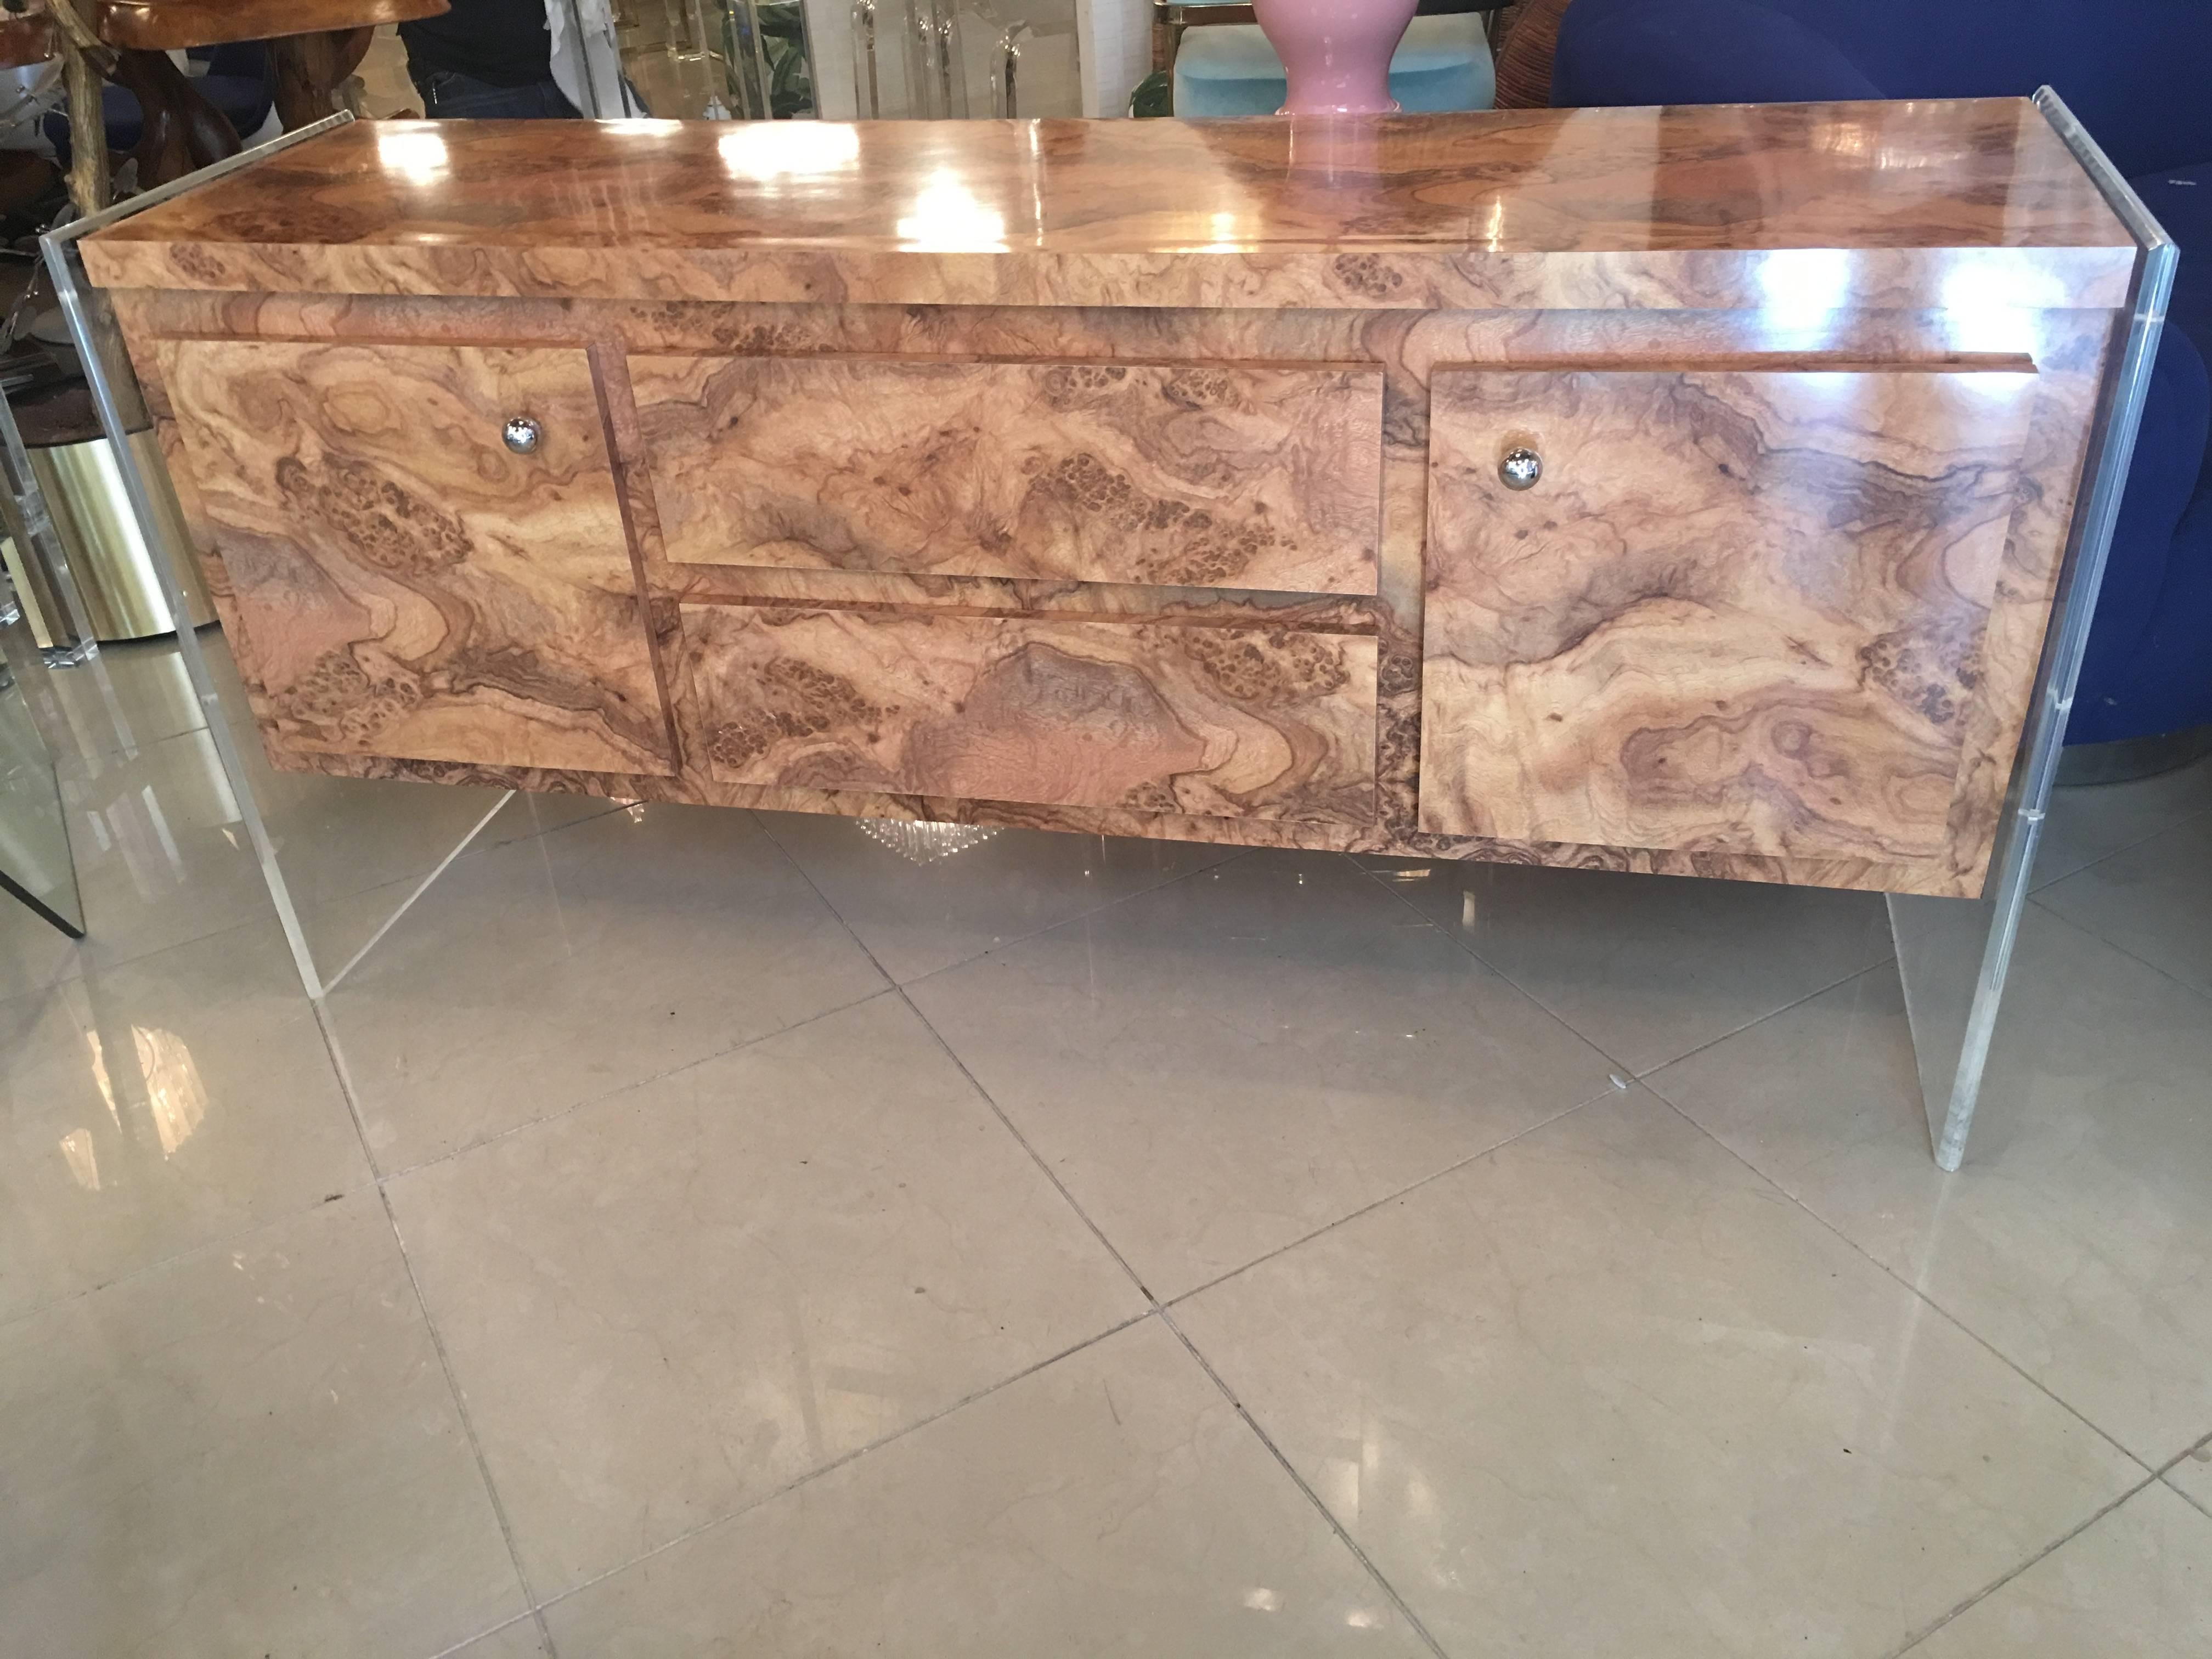 Vintage faux burl and Lucite sided credenza, buffet, sideboard or dresser with original chrome knobs. This piece is in great condition. The Lucite is clear.